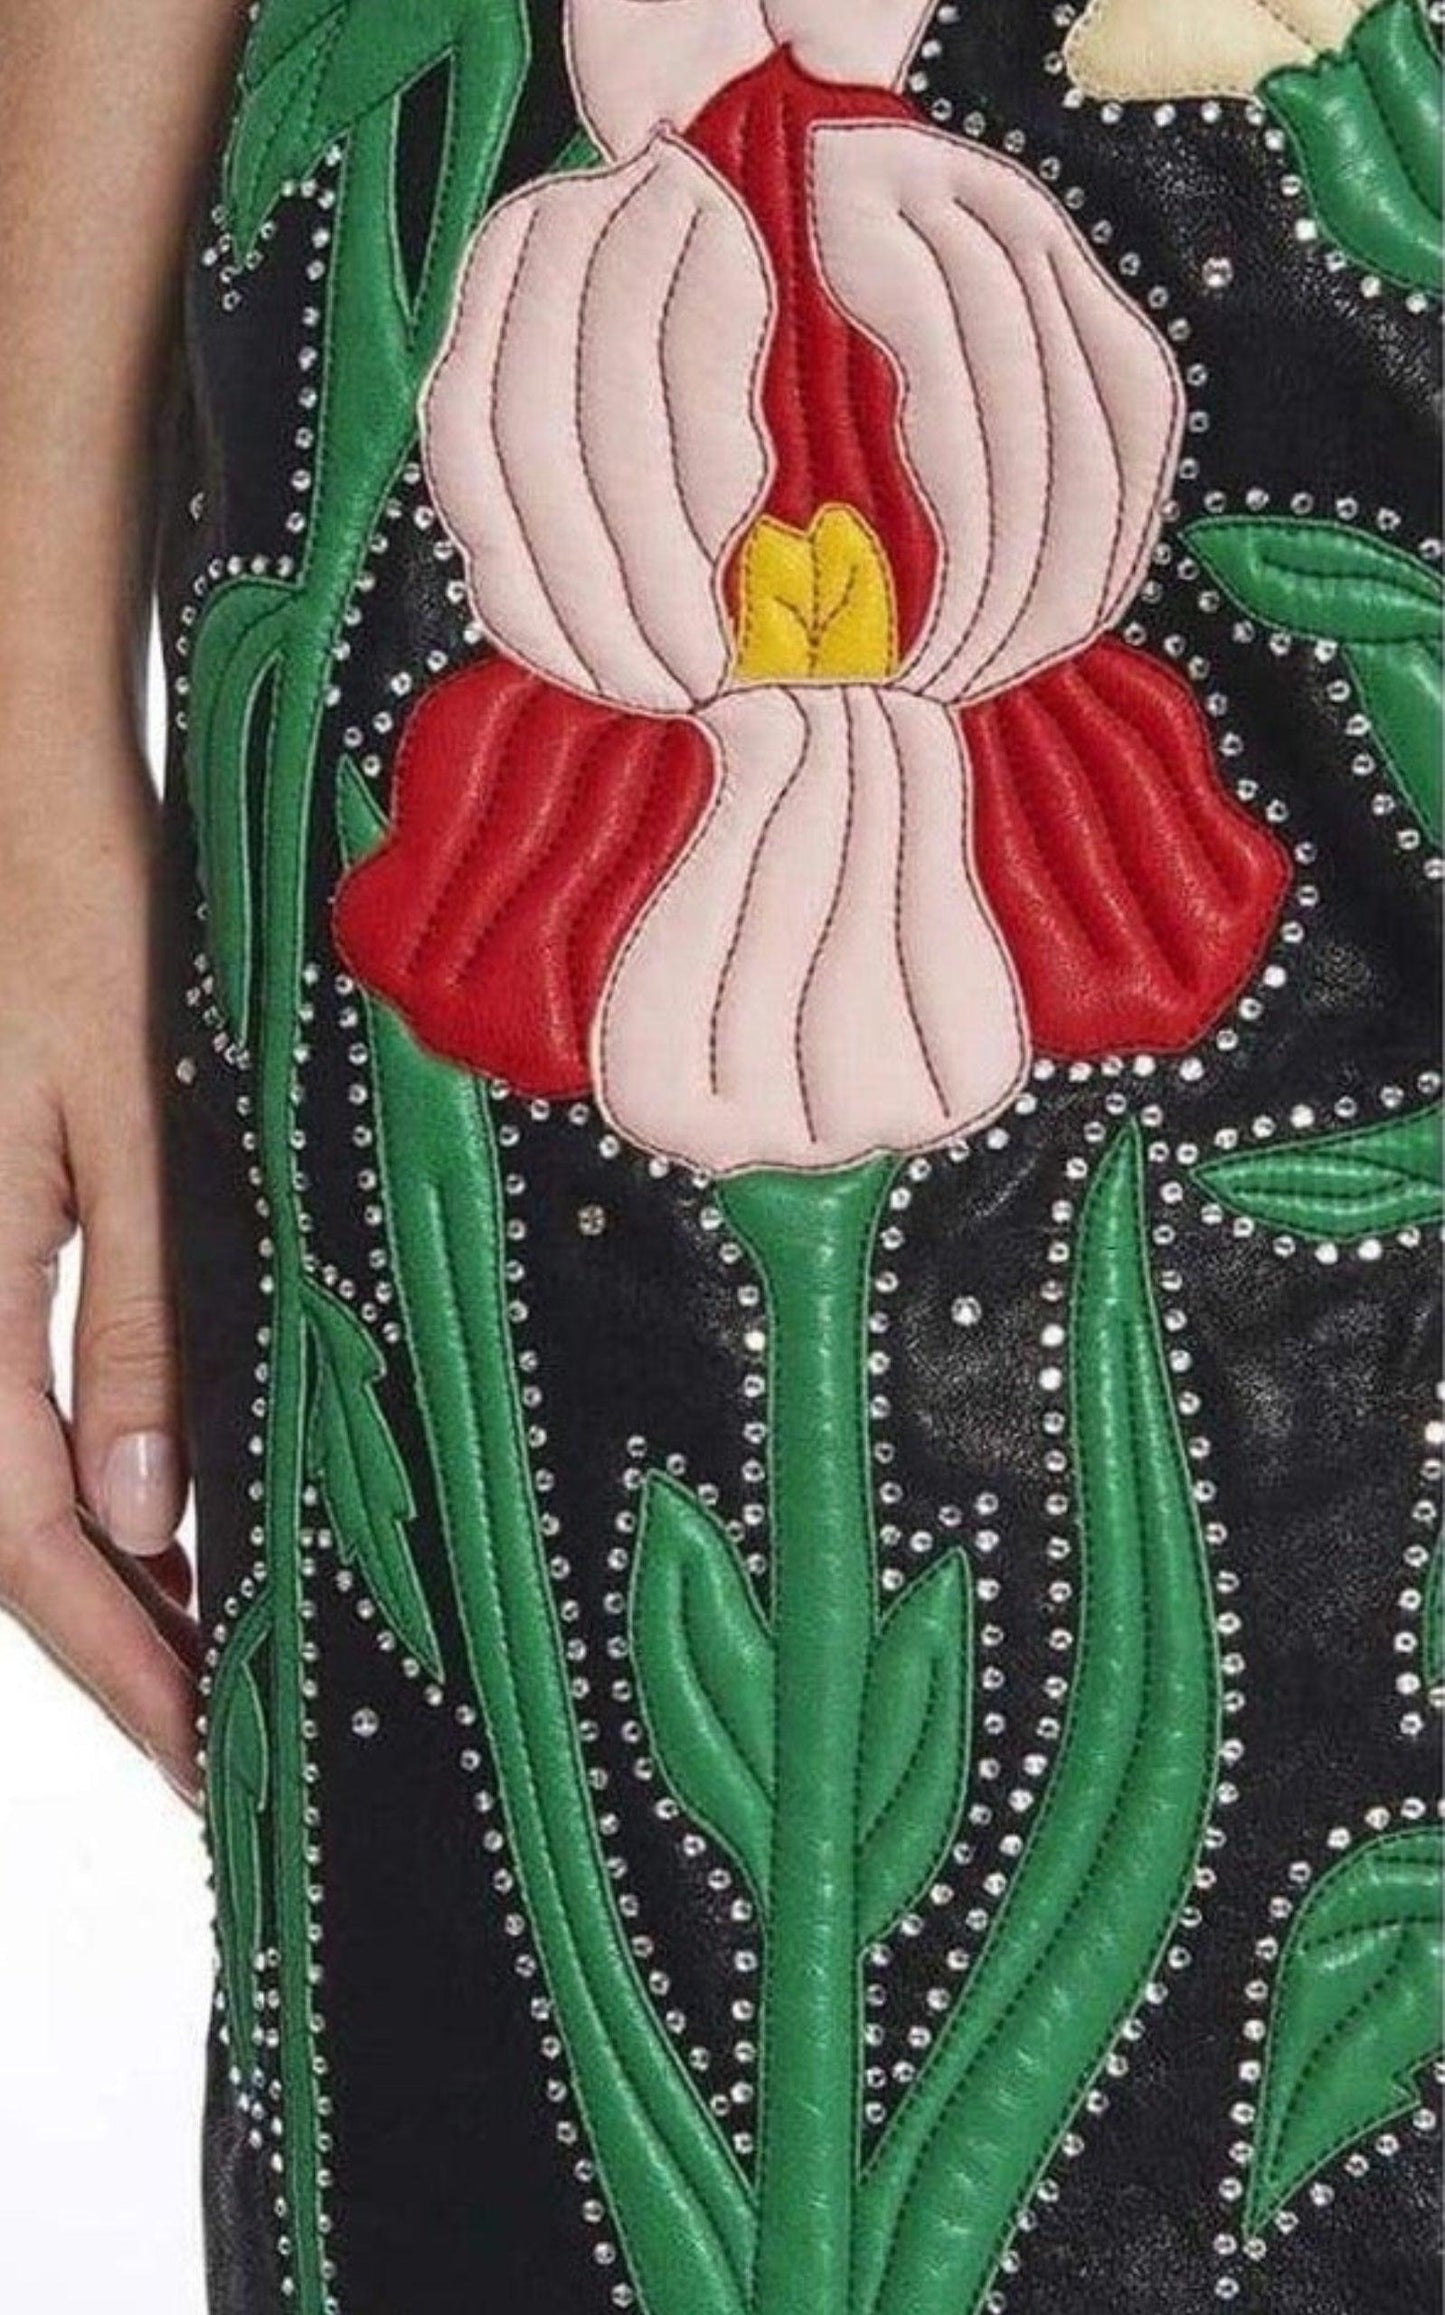  GucciLeather Flower Intarsia Strapless Dress - Runway Catalog